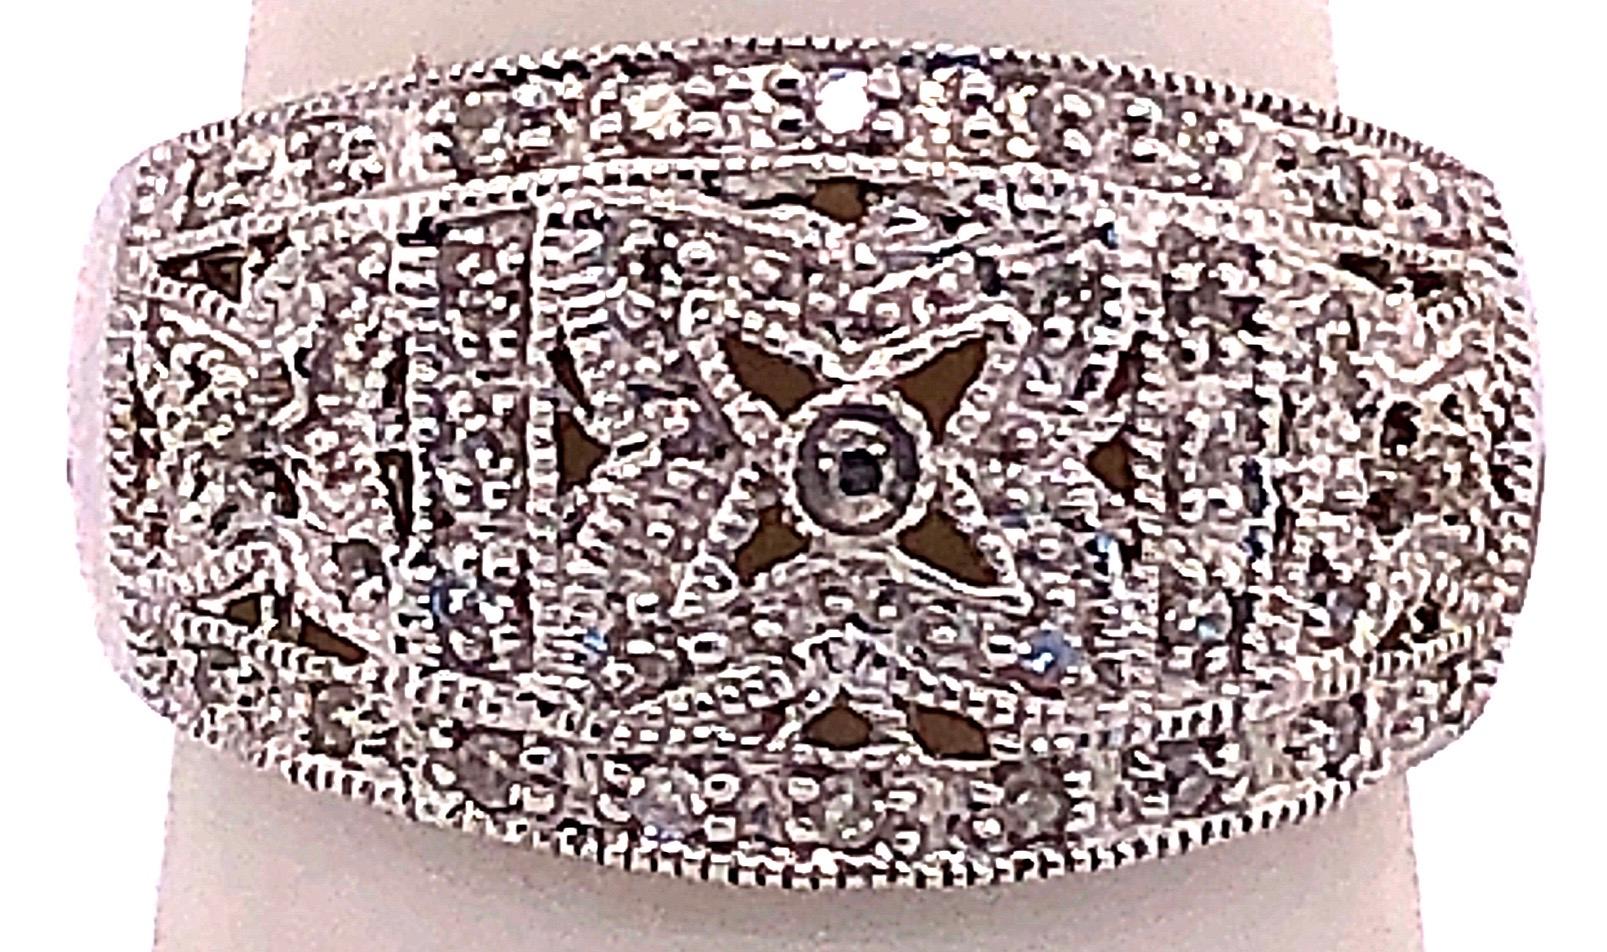 14 Karat White Gold Fashion Ring with Round Diamonds Size 7.
0.35 total diamond weight.
5 grams total weight.
11.58 ring height.